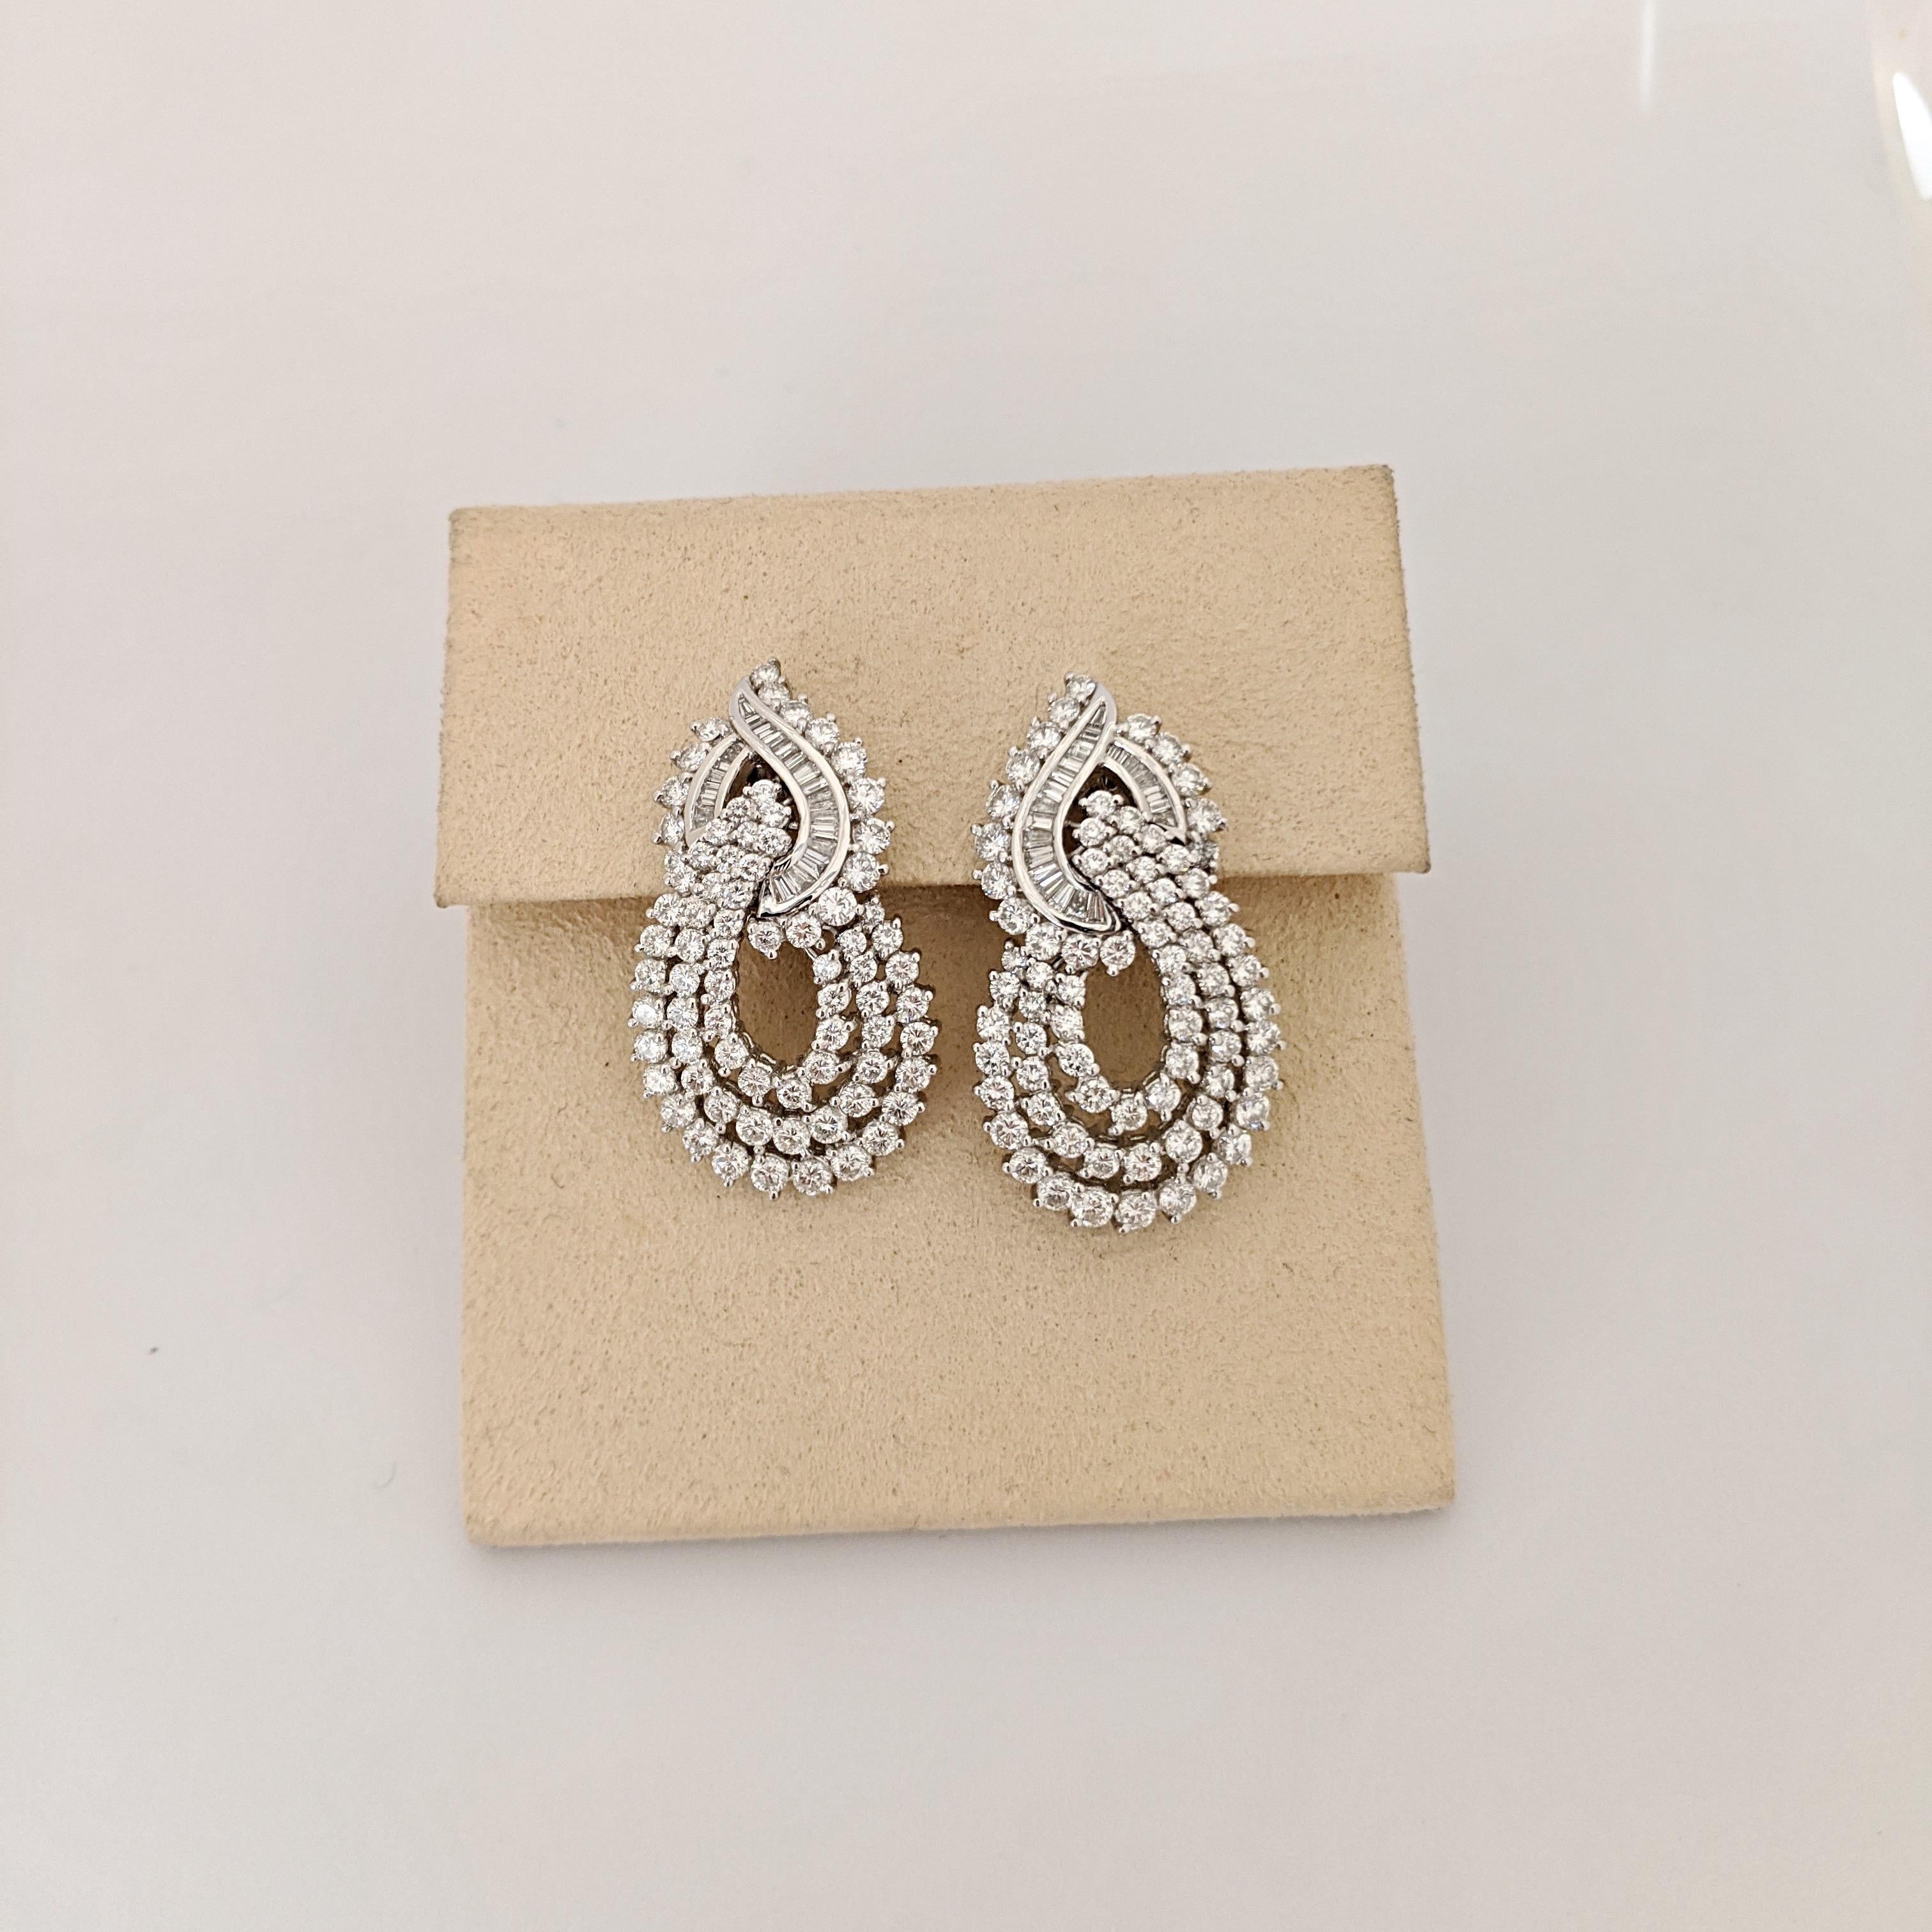 Cellini Jewelers Elegant Diamond earrings. These Platinum earrings are designed with round brilliant and baguette cut Diamonds. They are in the door knocker style and hang gracefully from the ears. They have a flexible post back making them suitable